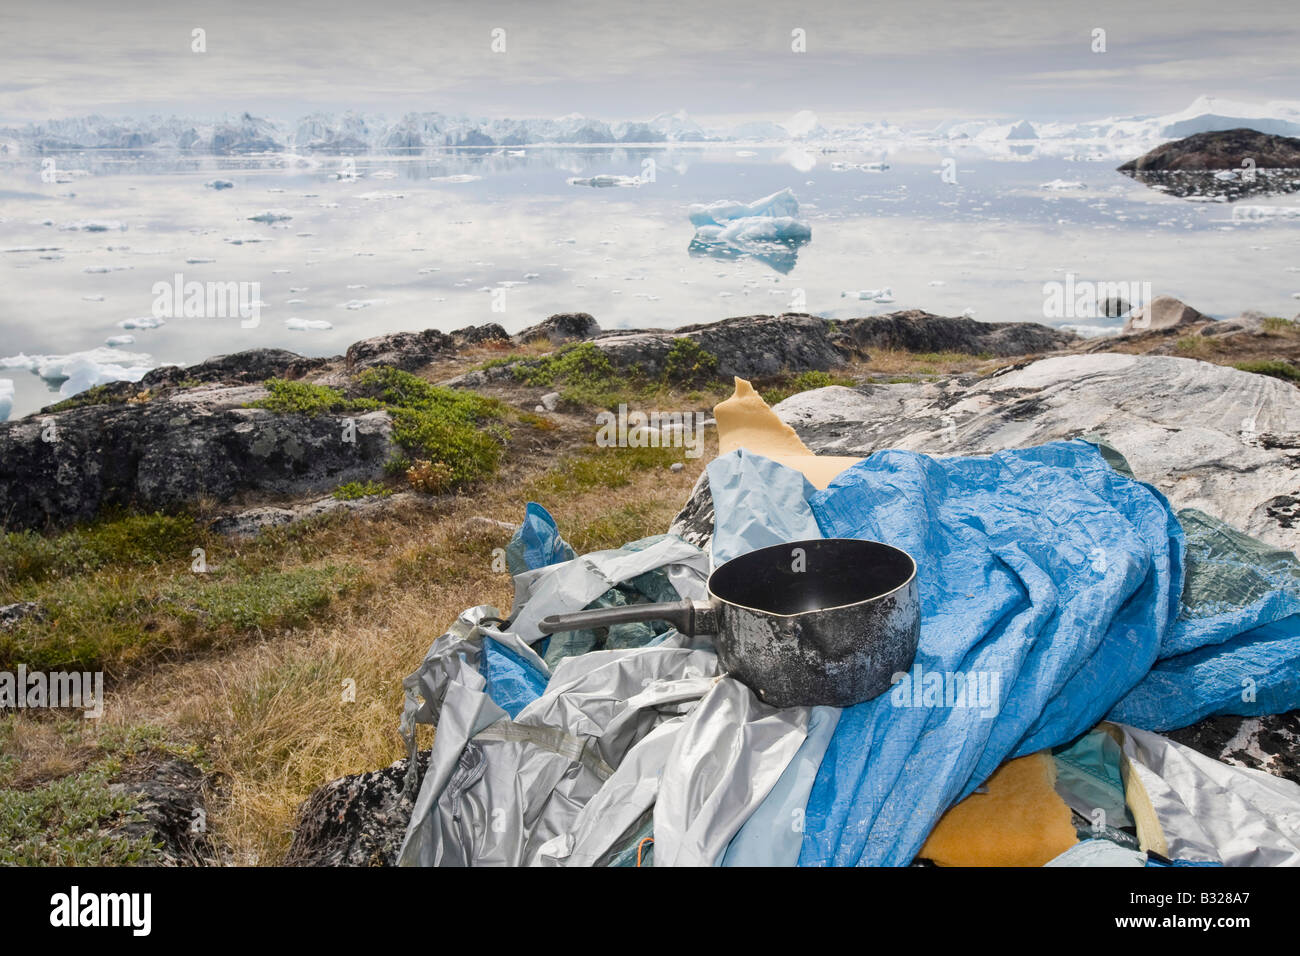 The irony of someone leaving their trassh behind in the UNESCO World Heritage Site of Ilulissat Icefjord on Greenland Stock Photo